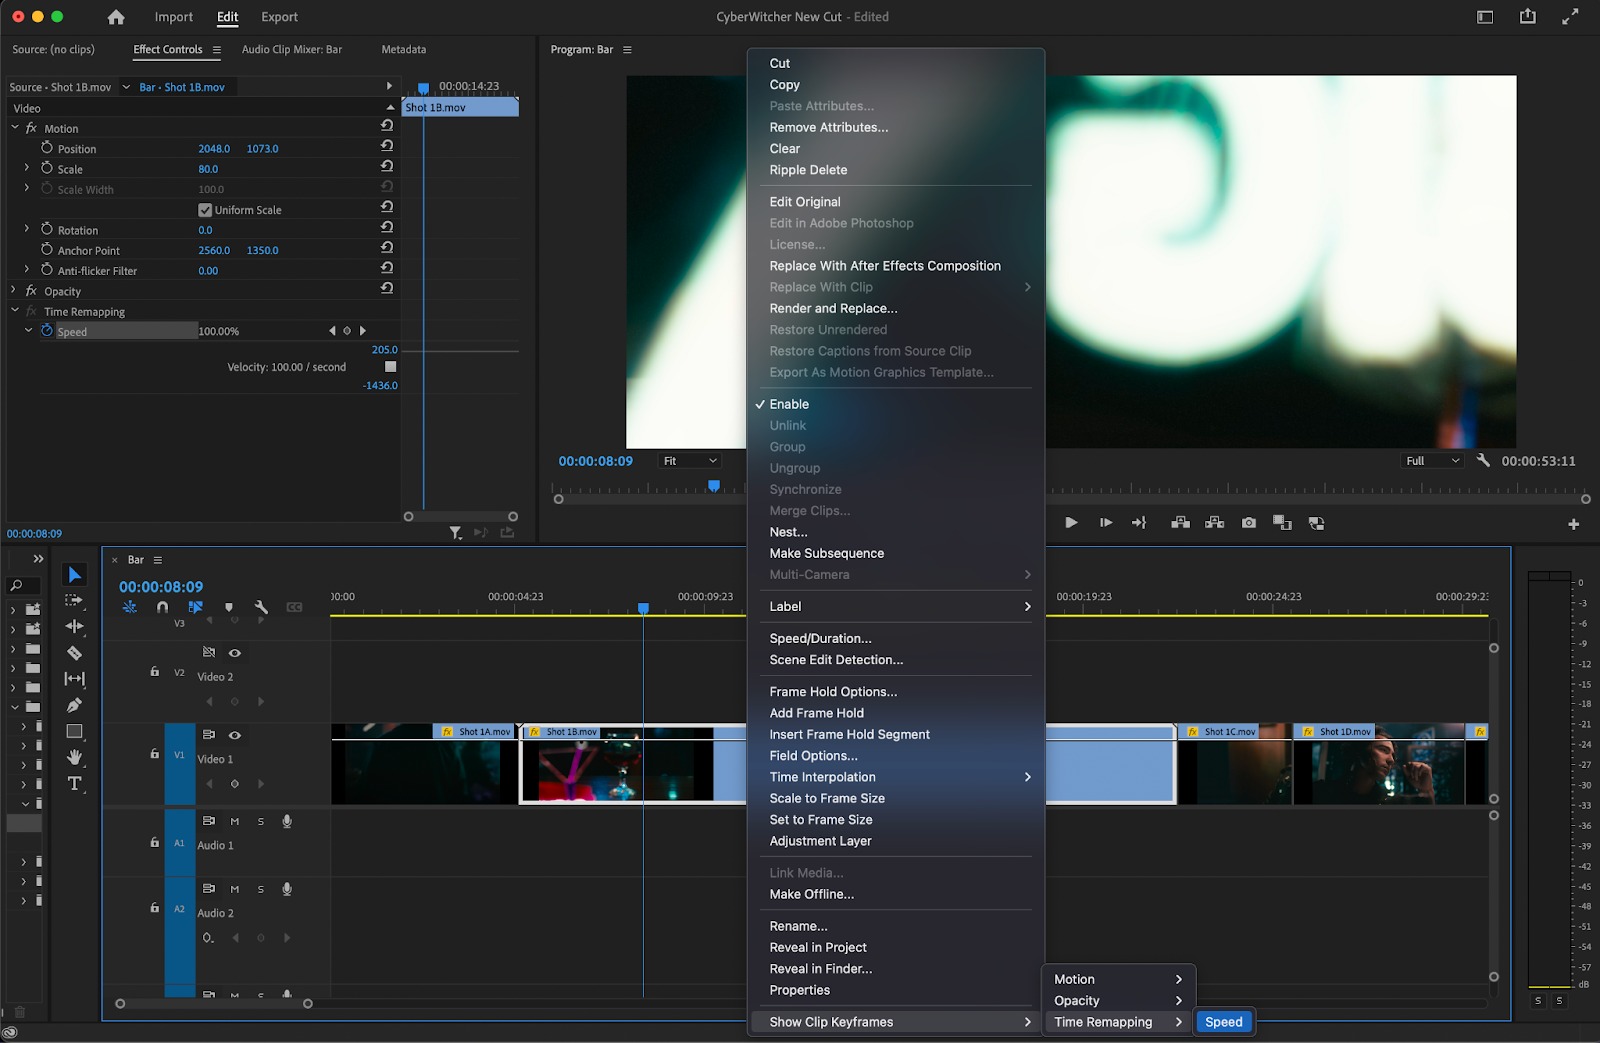 How To Slow Down Playback Speed In Premiere Pro